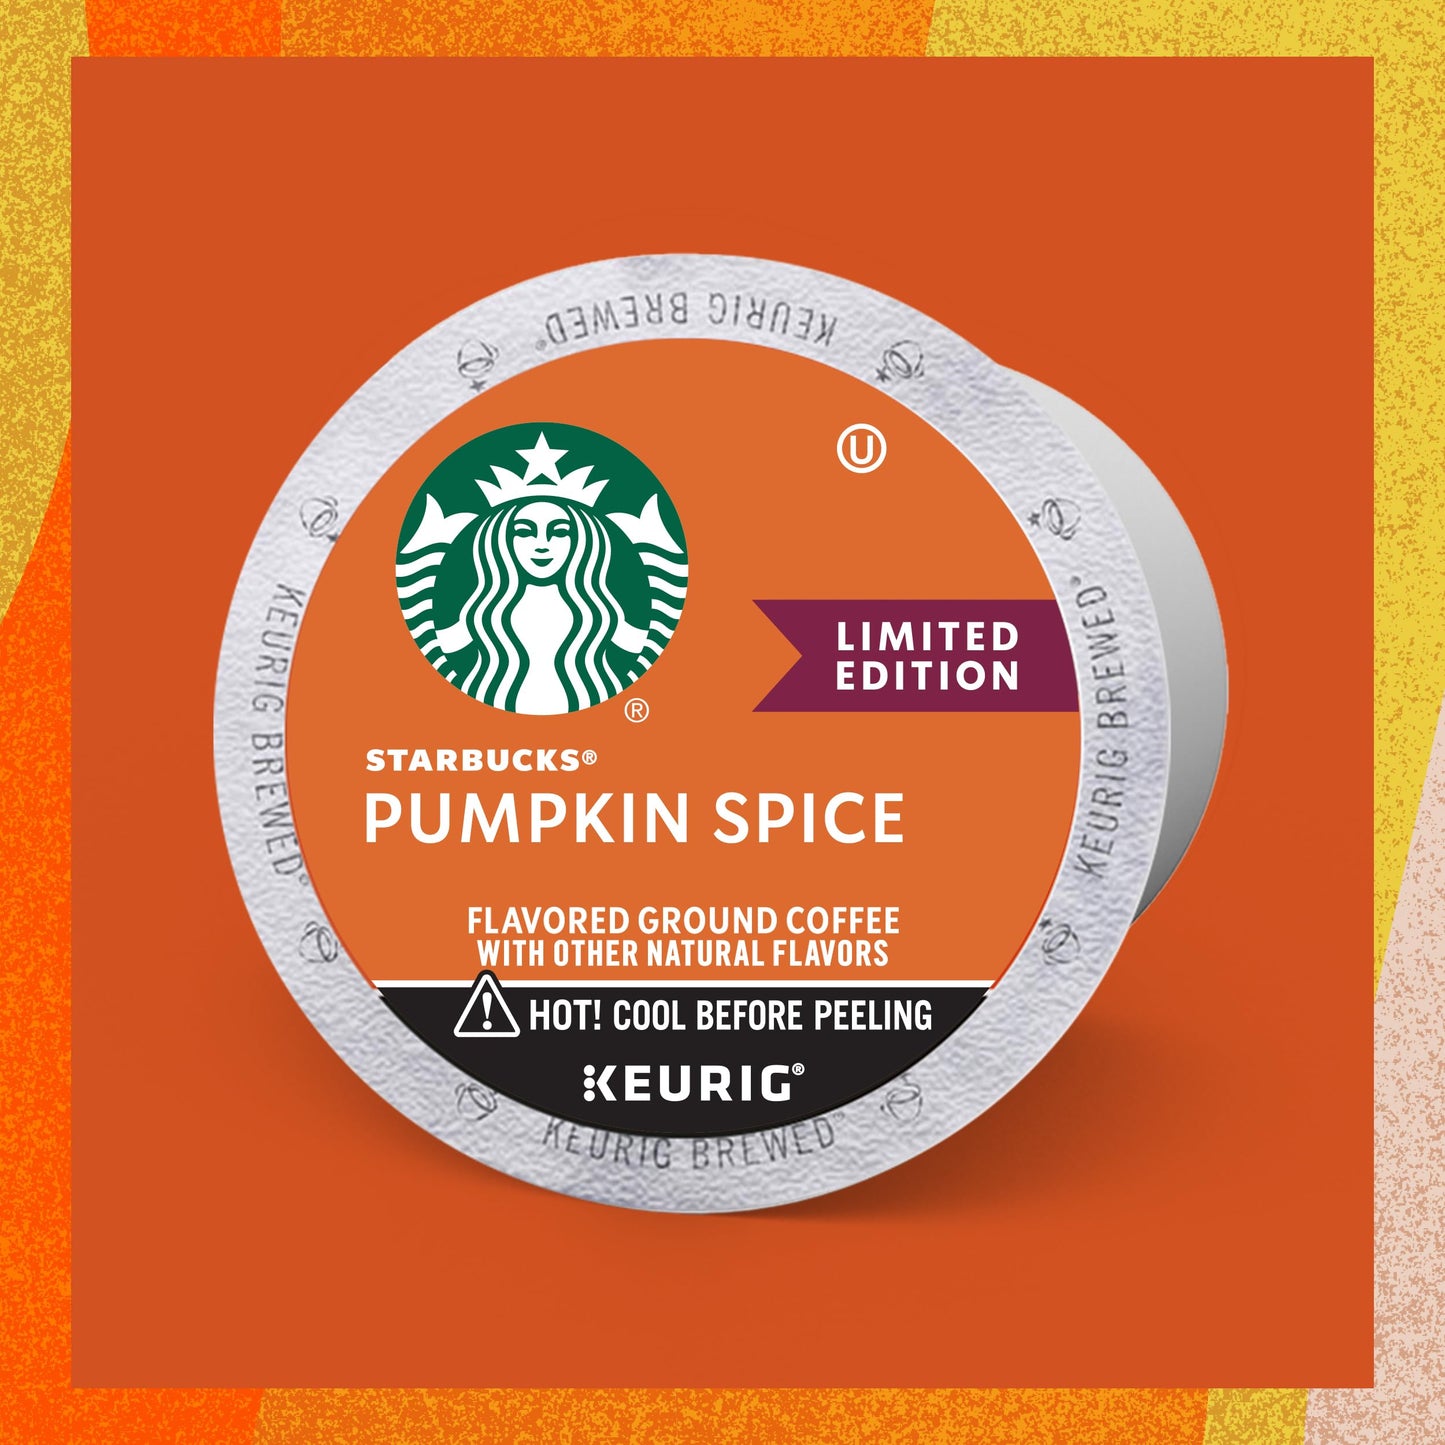 Starbucks K-Cup Coffee Pods—Pumpkin Spice Flavored Coffee—100% Arabica—Naturally Flavored—10 Count (Pack of 6)